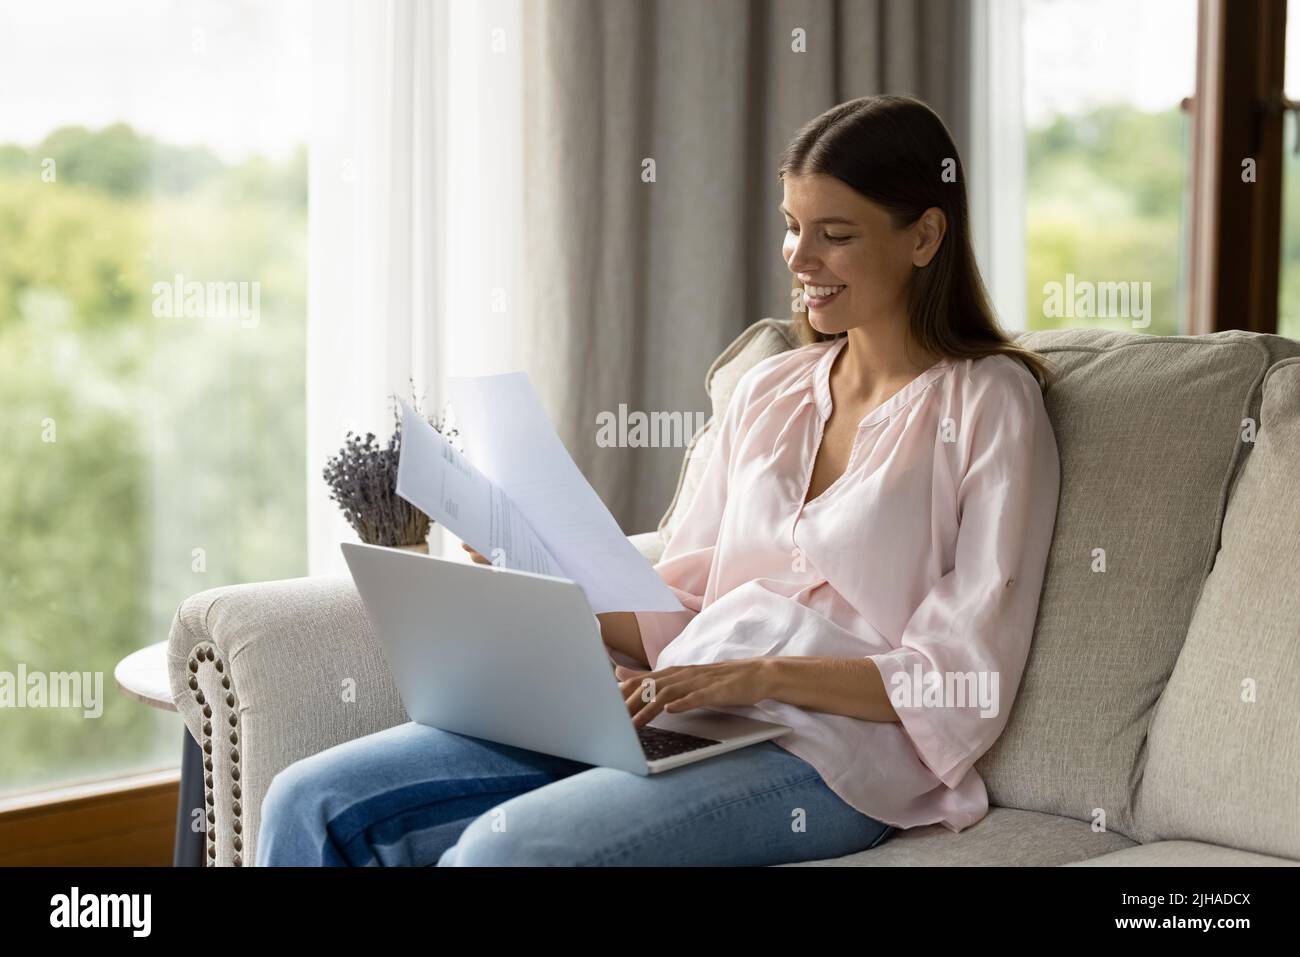 Attractive woman sorting out papers sit on sofa use laptop Stock Photo